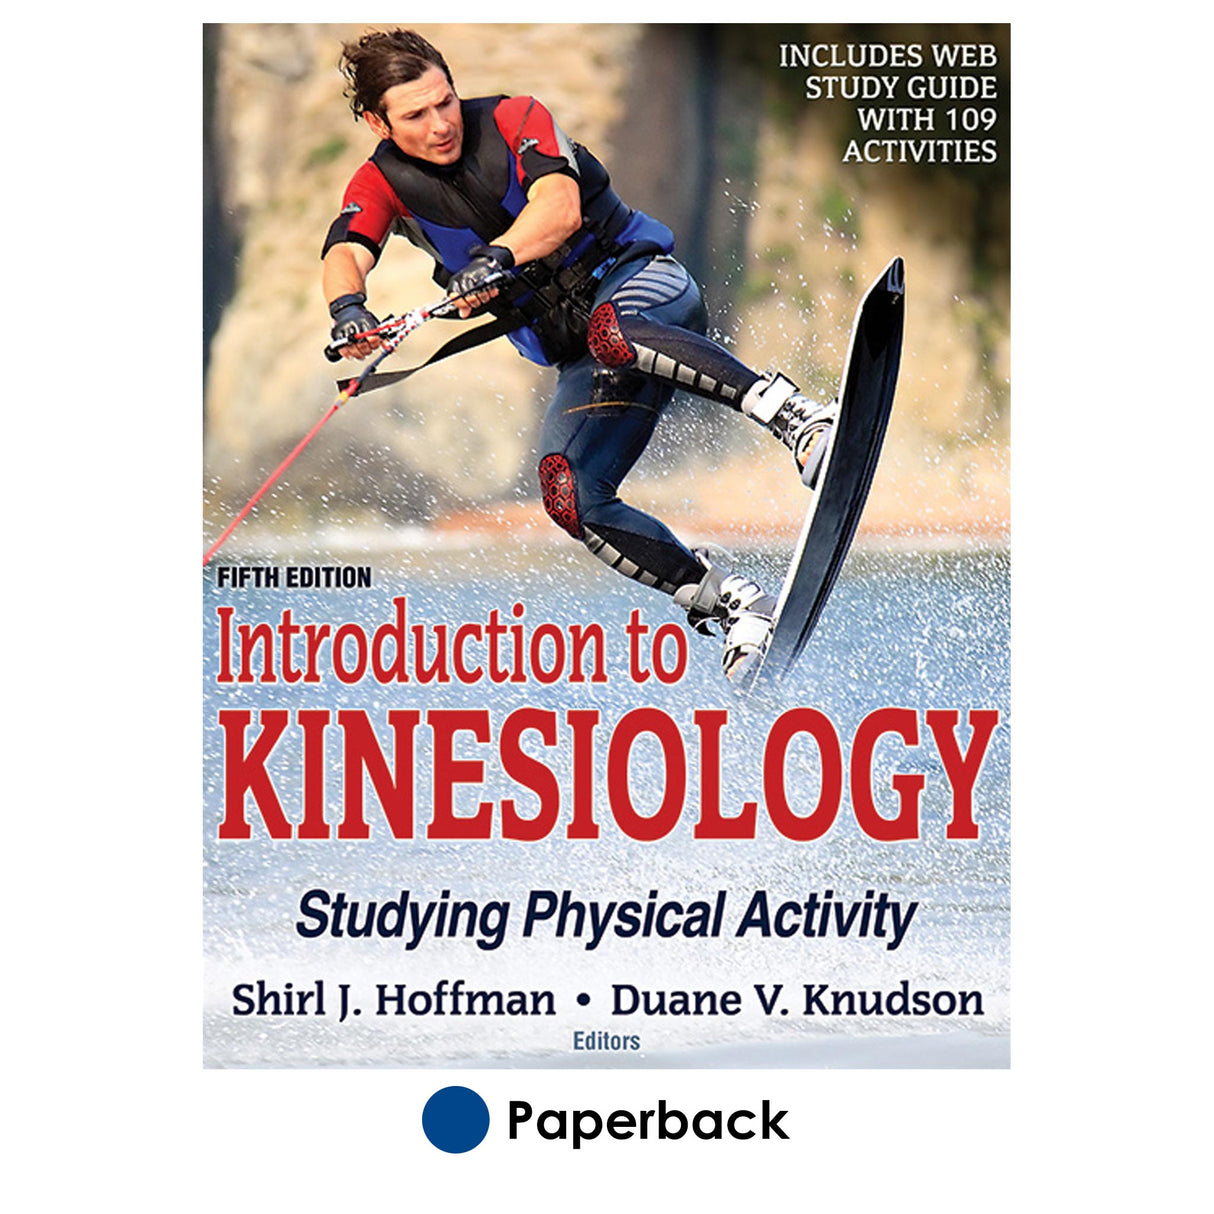 Introduction to Kinesiology 5th Edition With Web Study Guide